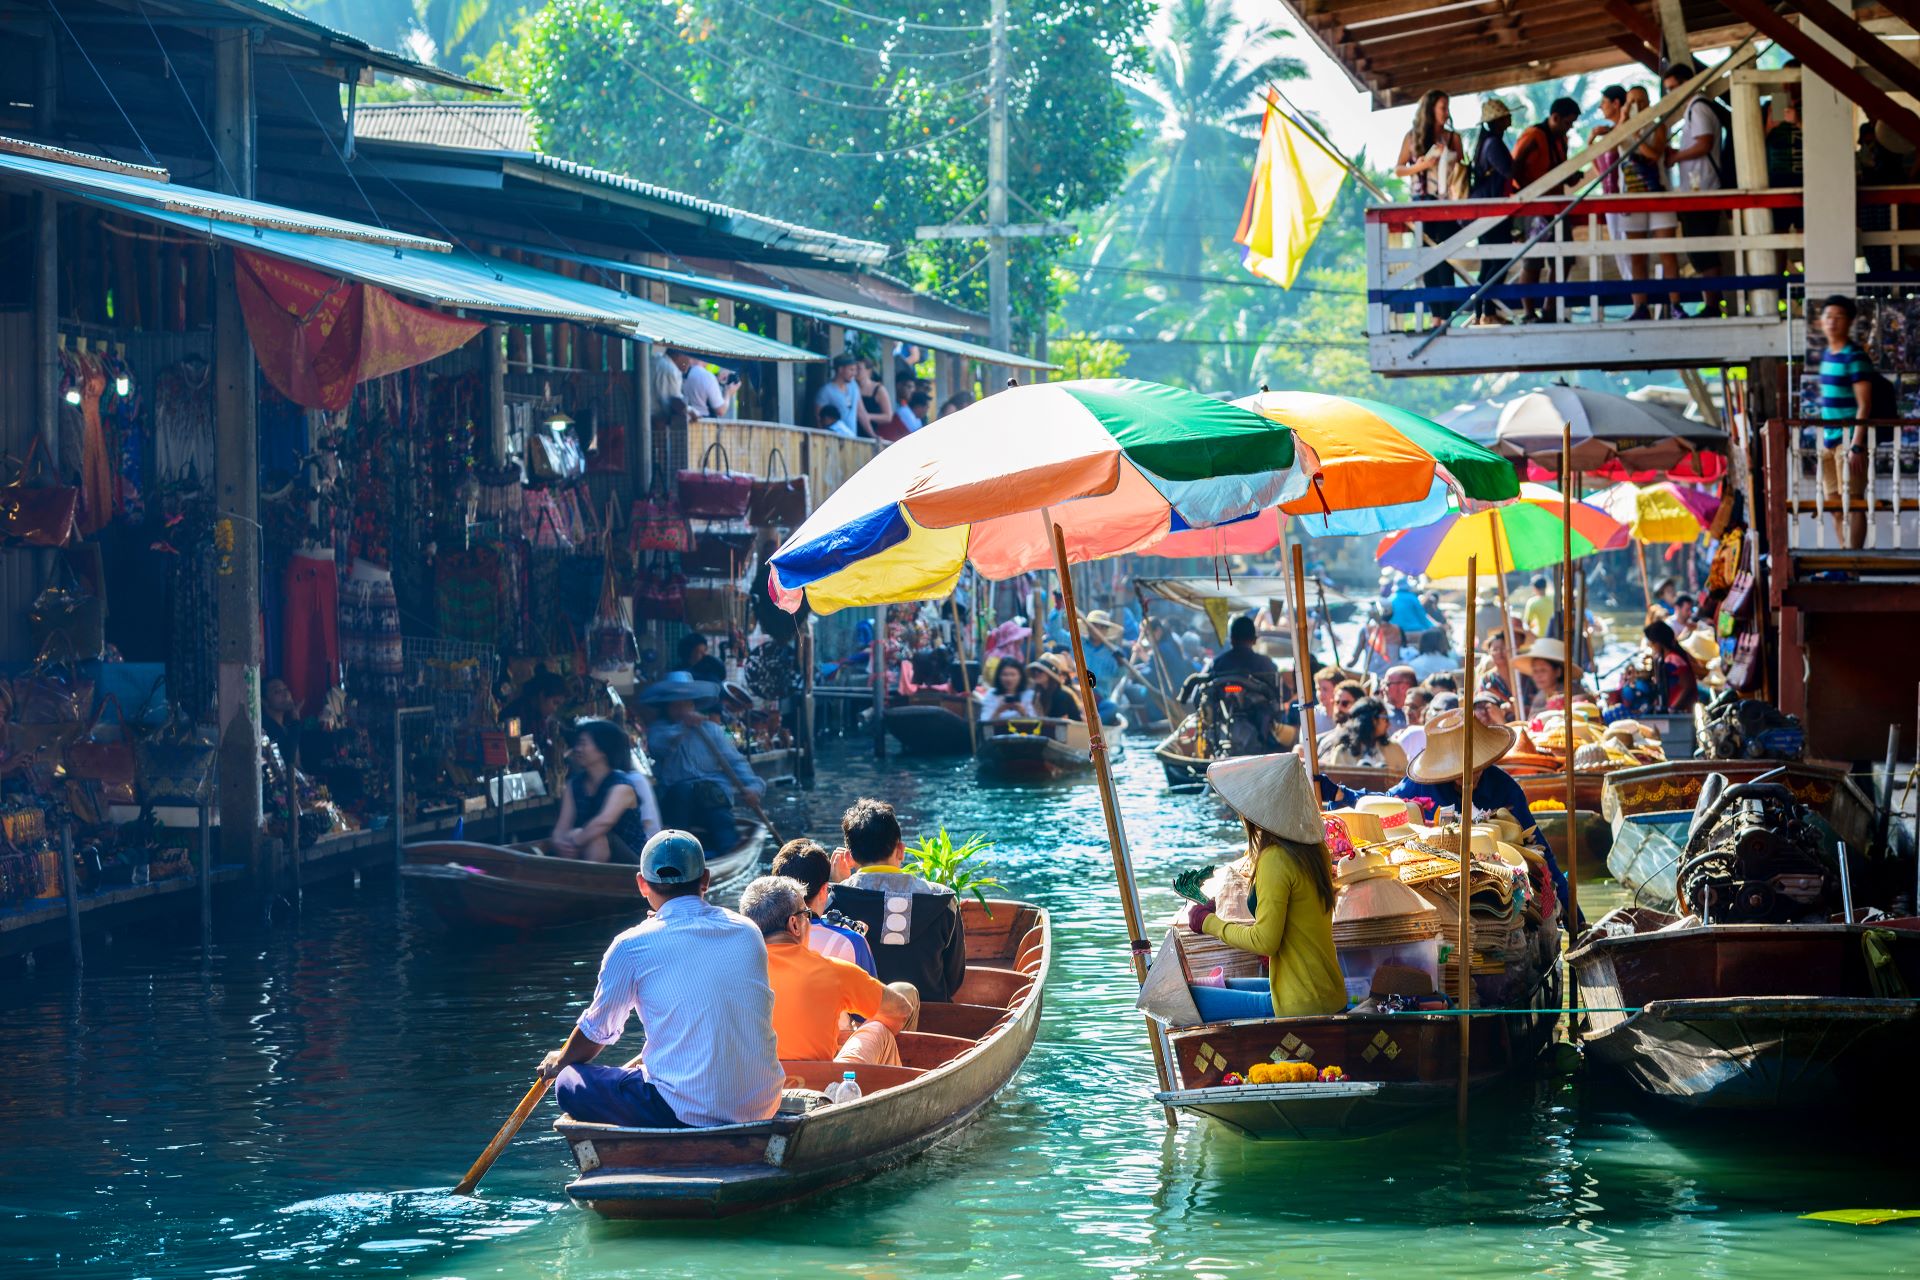 Three people sail on a boat through a bustling floating market in Bangkok, Thailand.